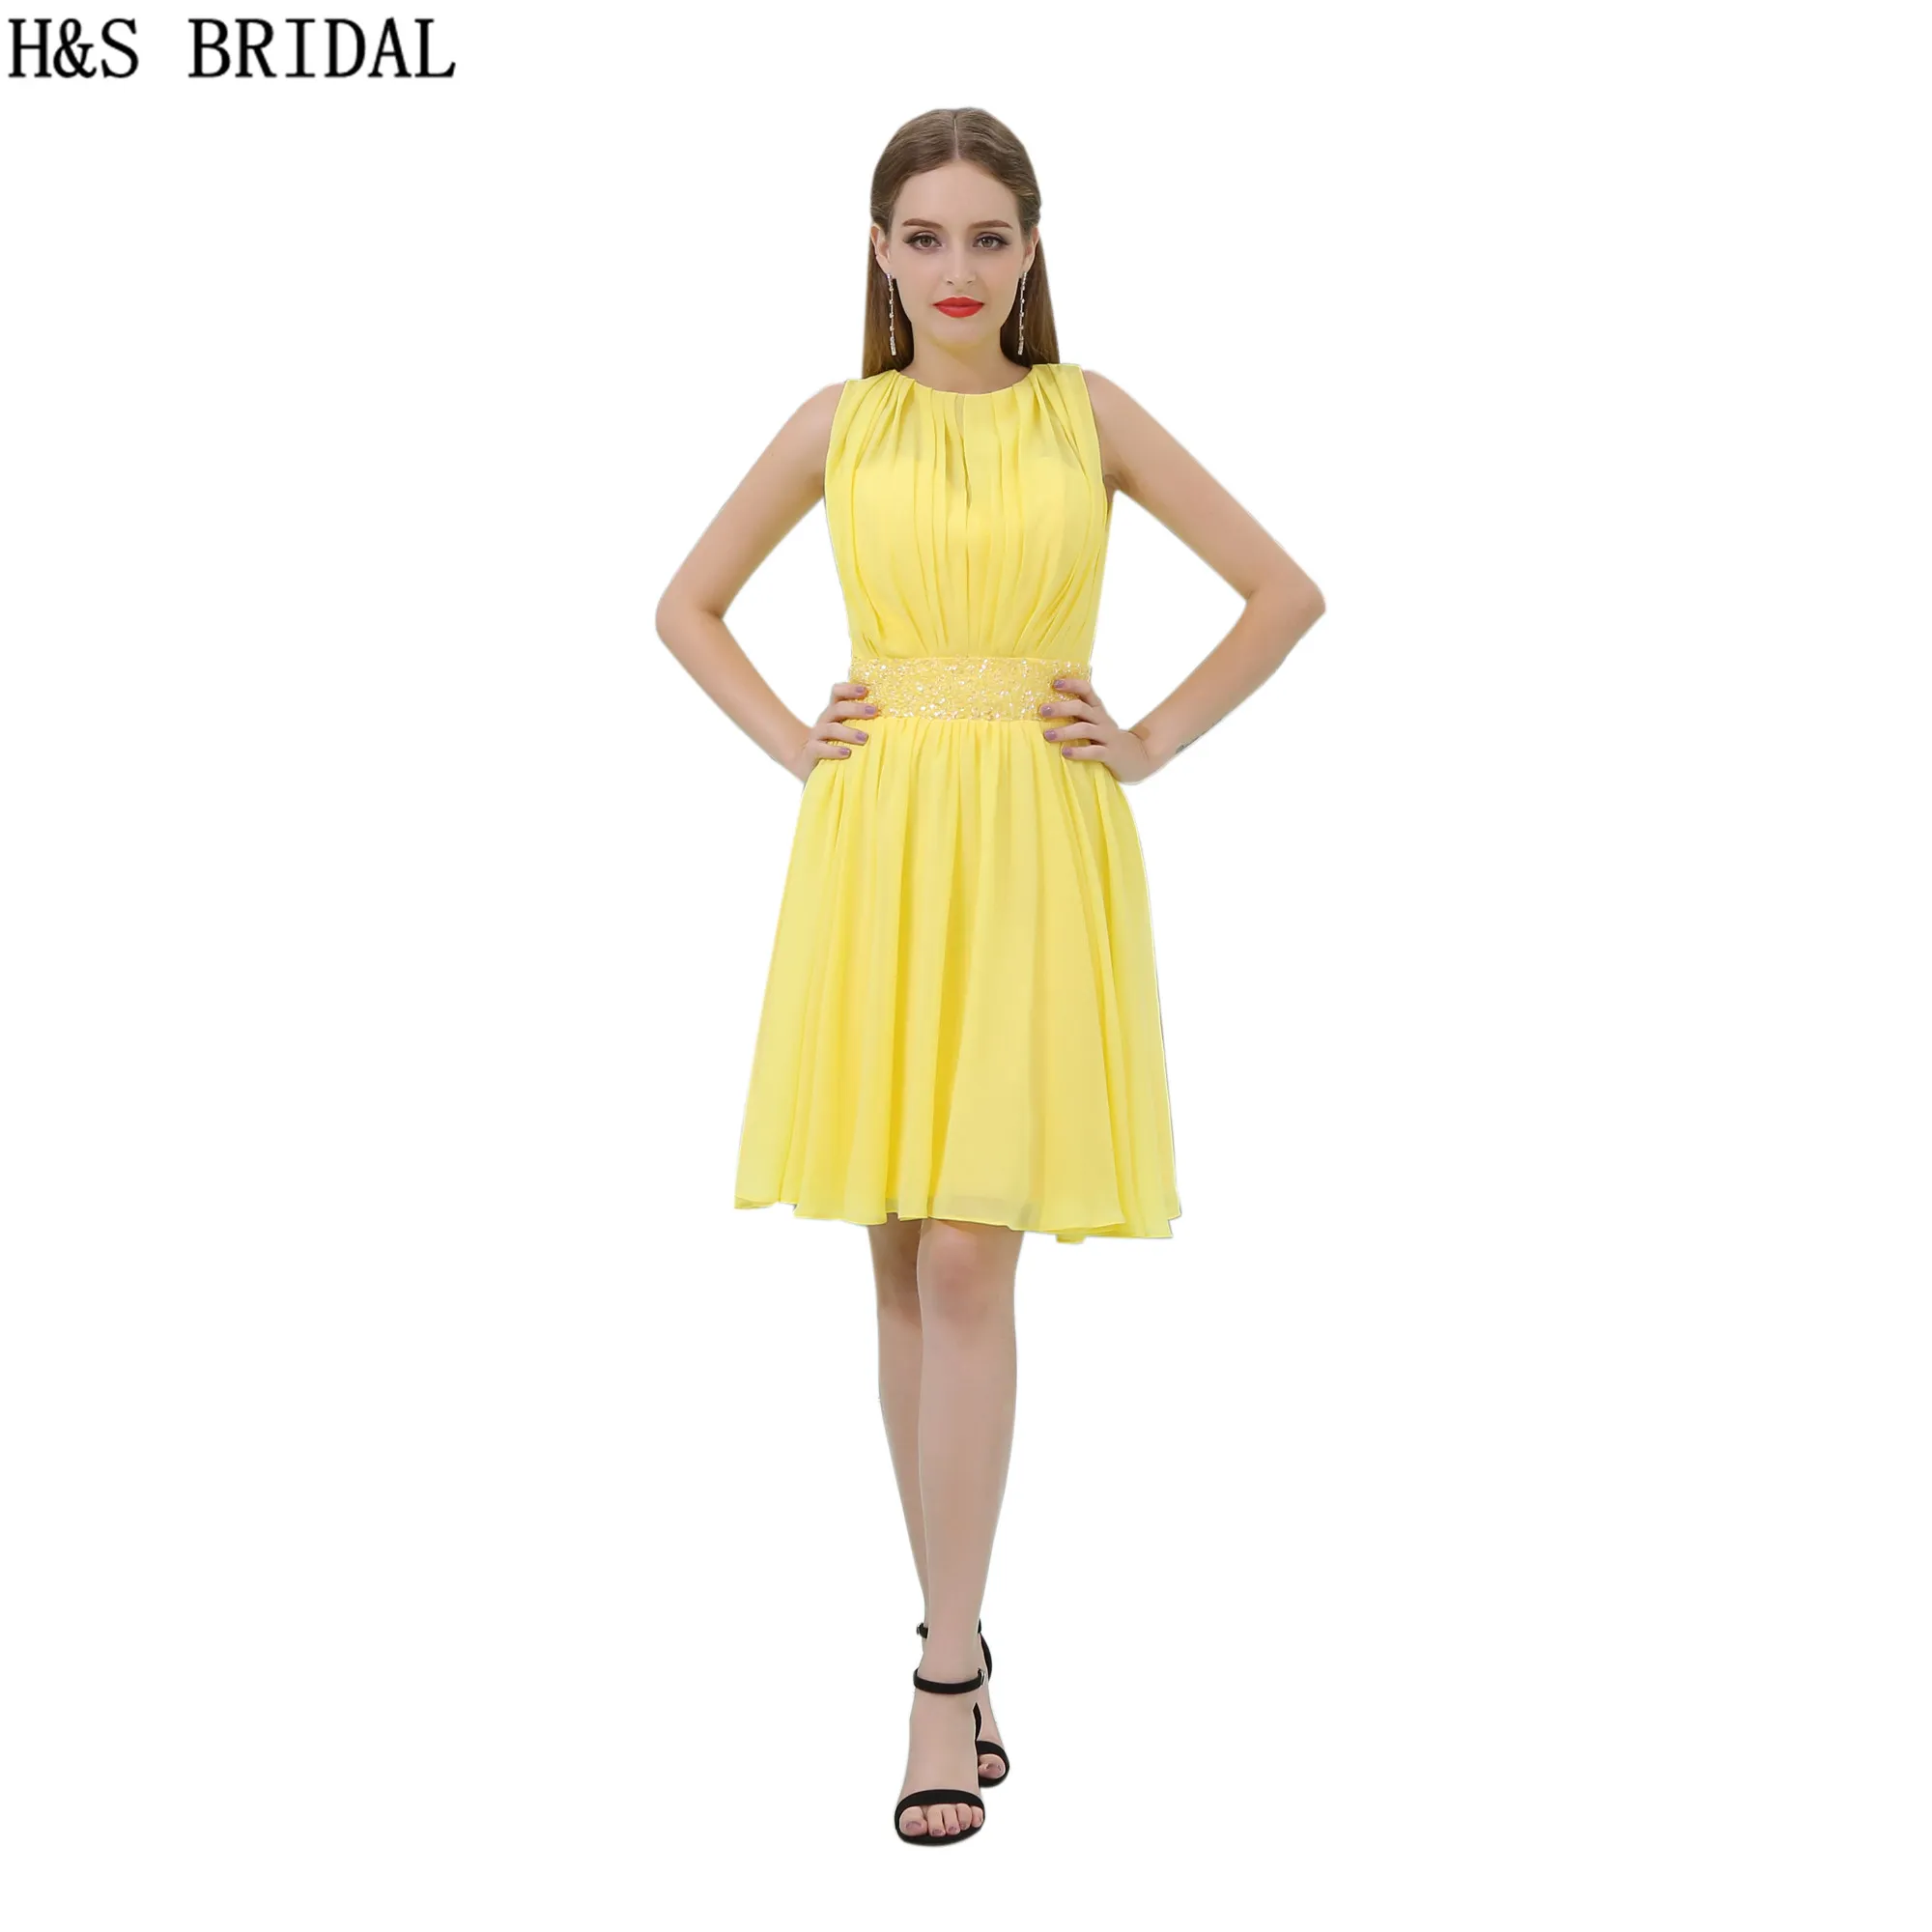 Short Chiffon Homecoming Dresses Beading Yellow Sheer Neck Cocktail Dress Charming Girls Cheap Party Gowns B012